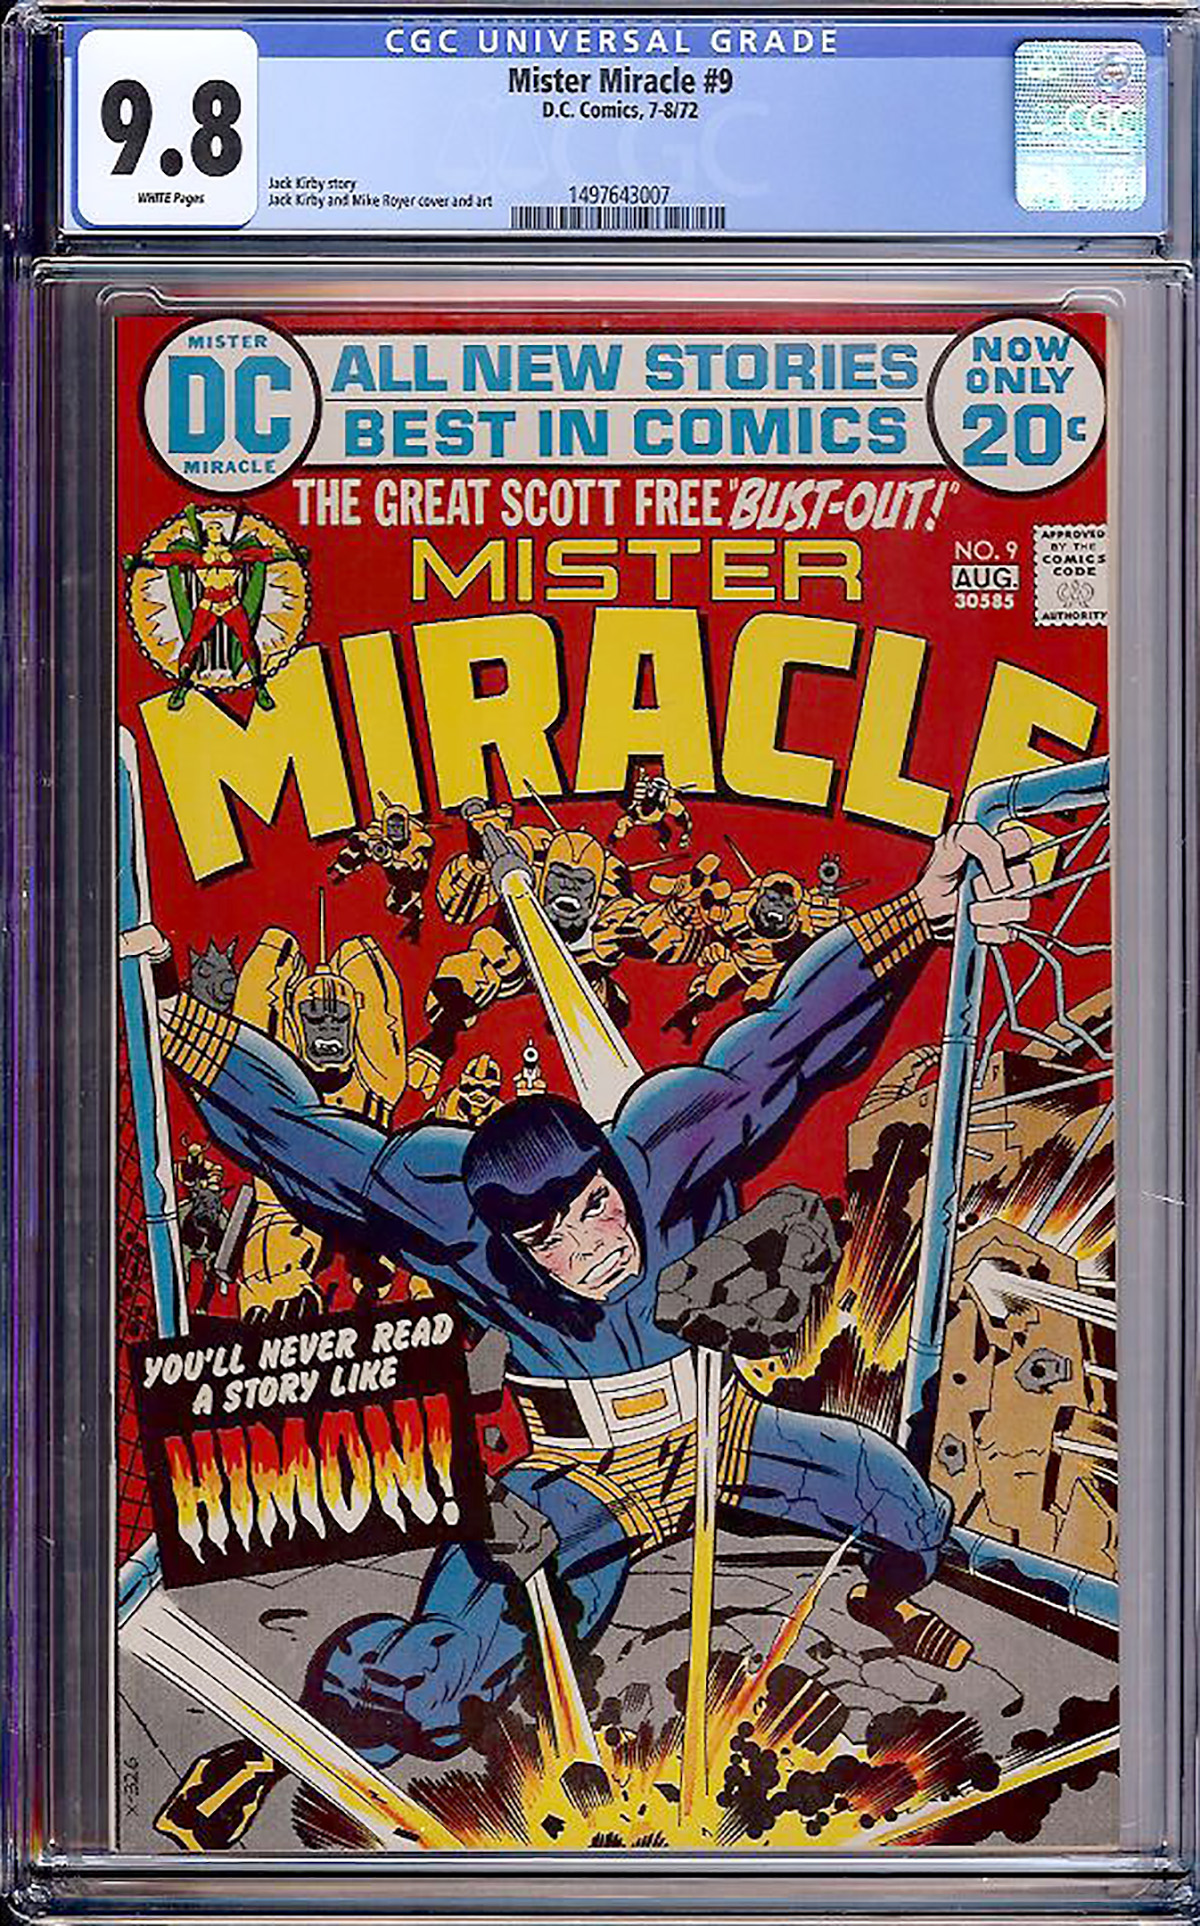 Mister Miracle #9 CGC 9.8 w